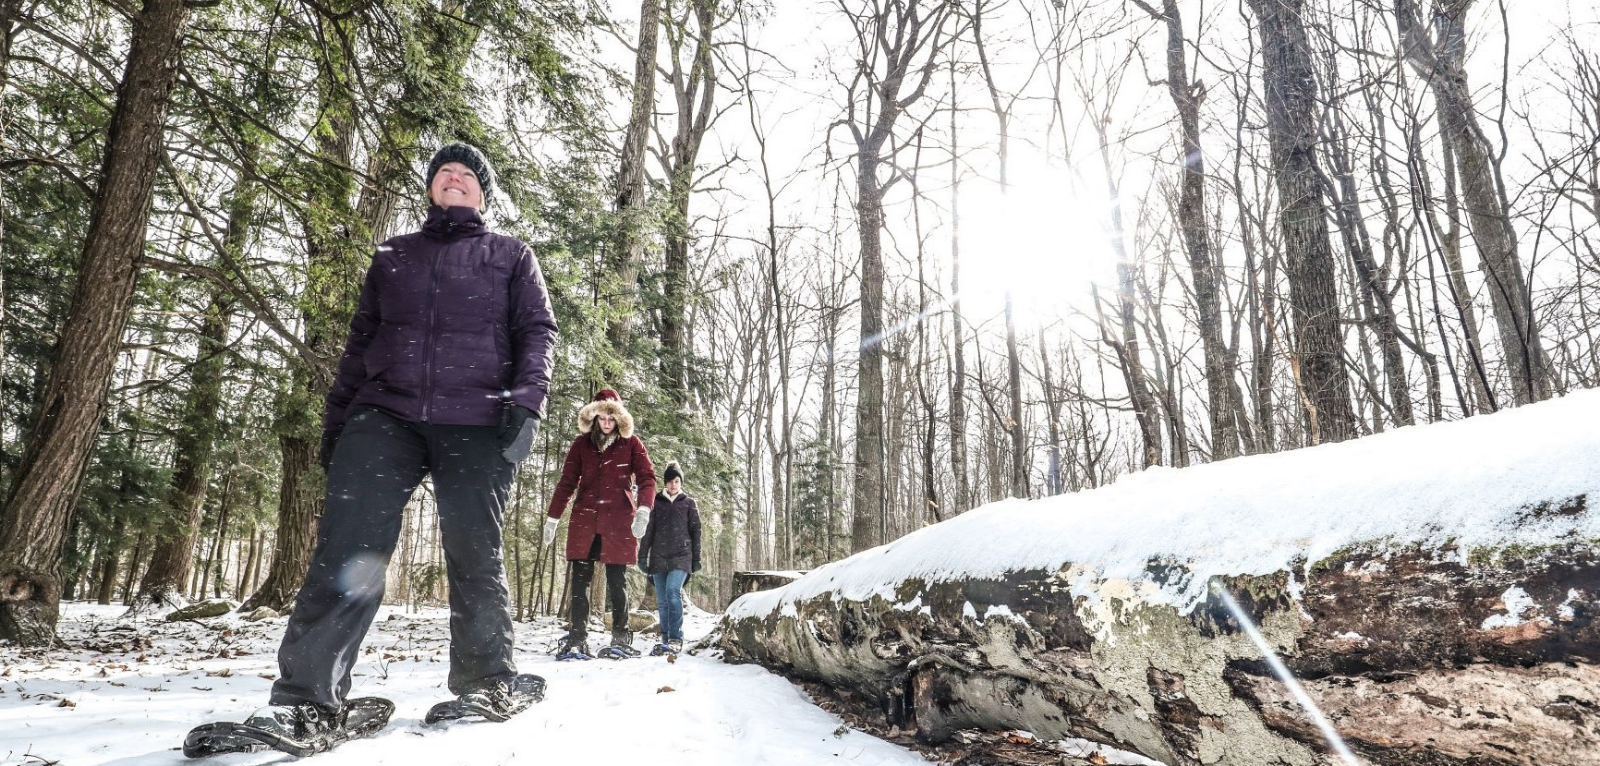 A group of snowshoers are walking through the forest.  